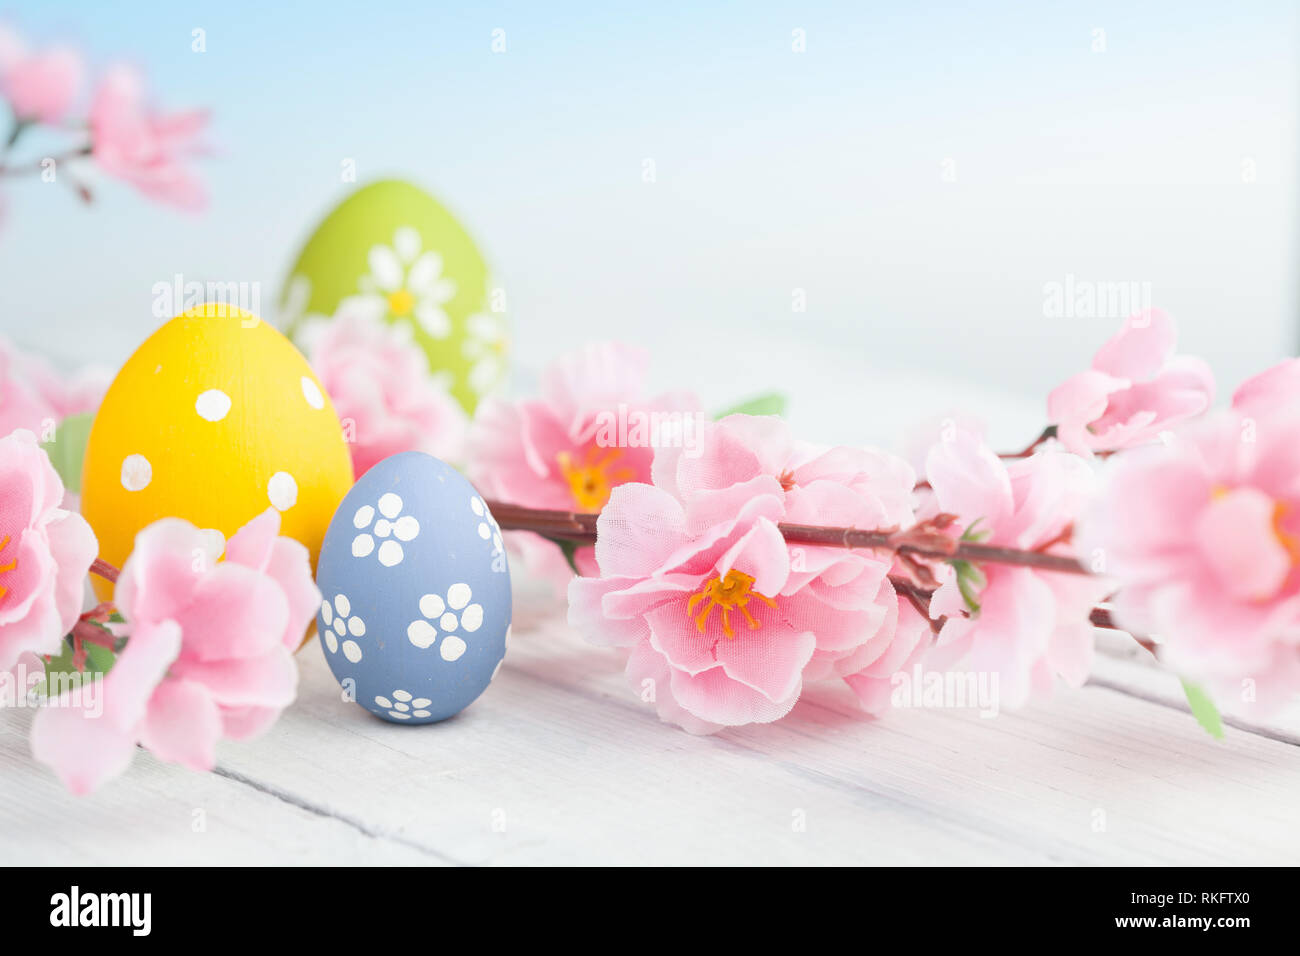 Easter eggs and pink flowers decoration on blue background Stock Photo